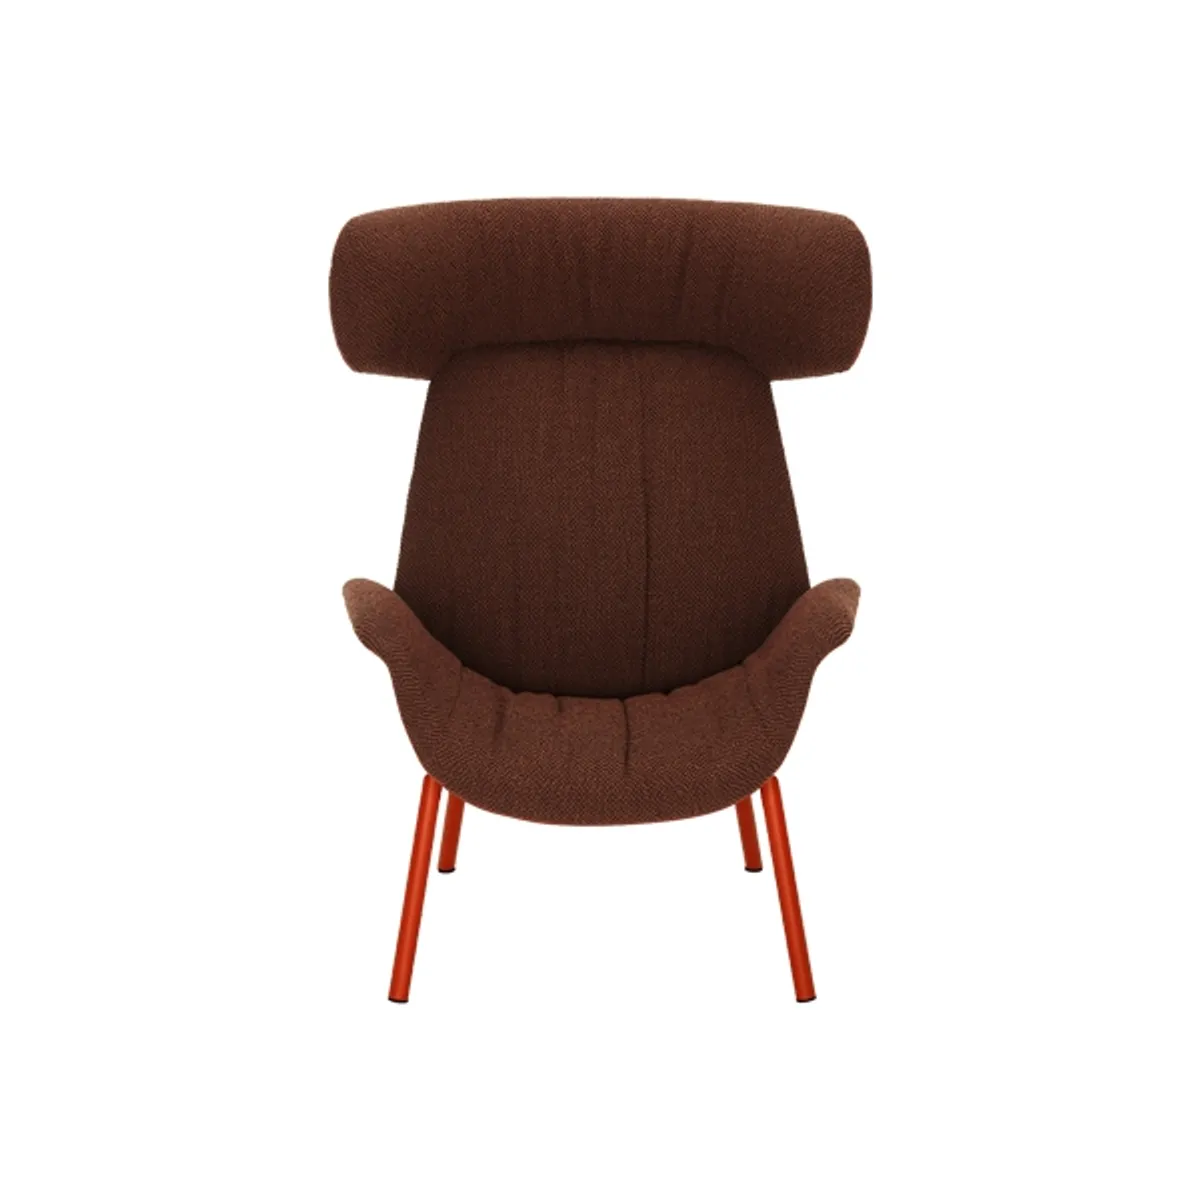 Ilawingbackloungechair Inside Out Contracts